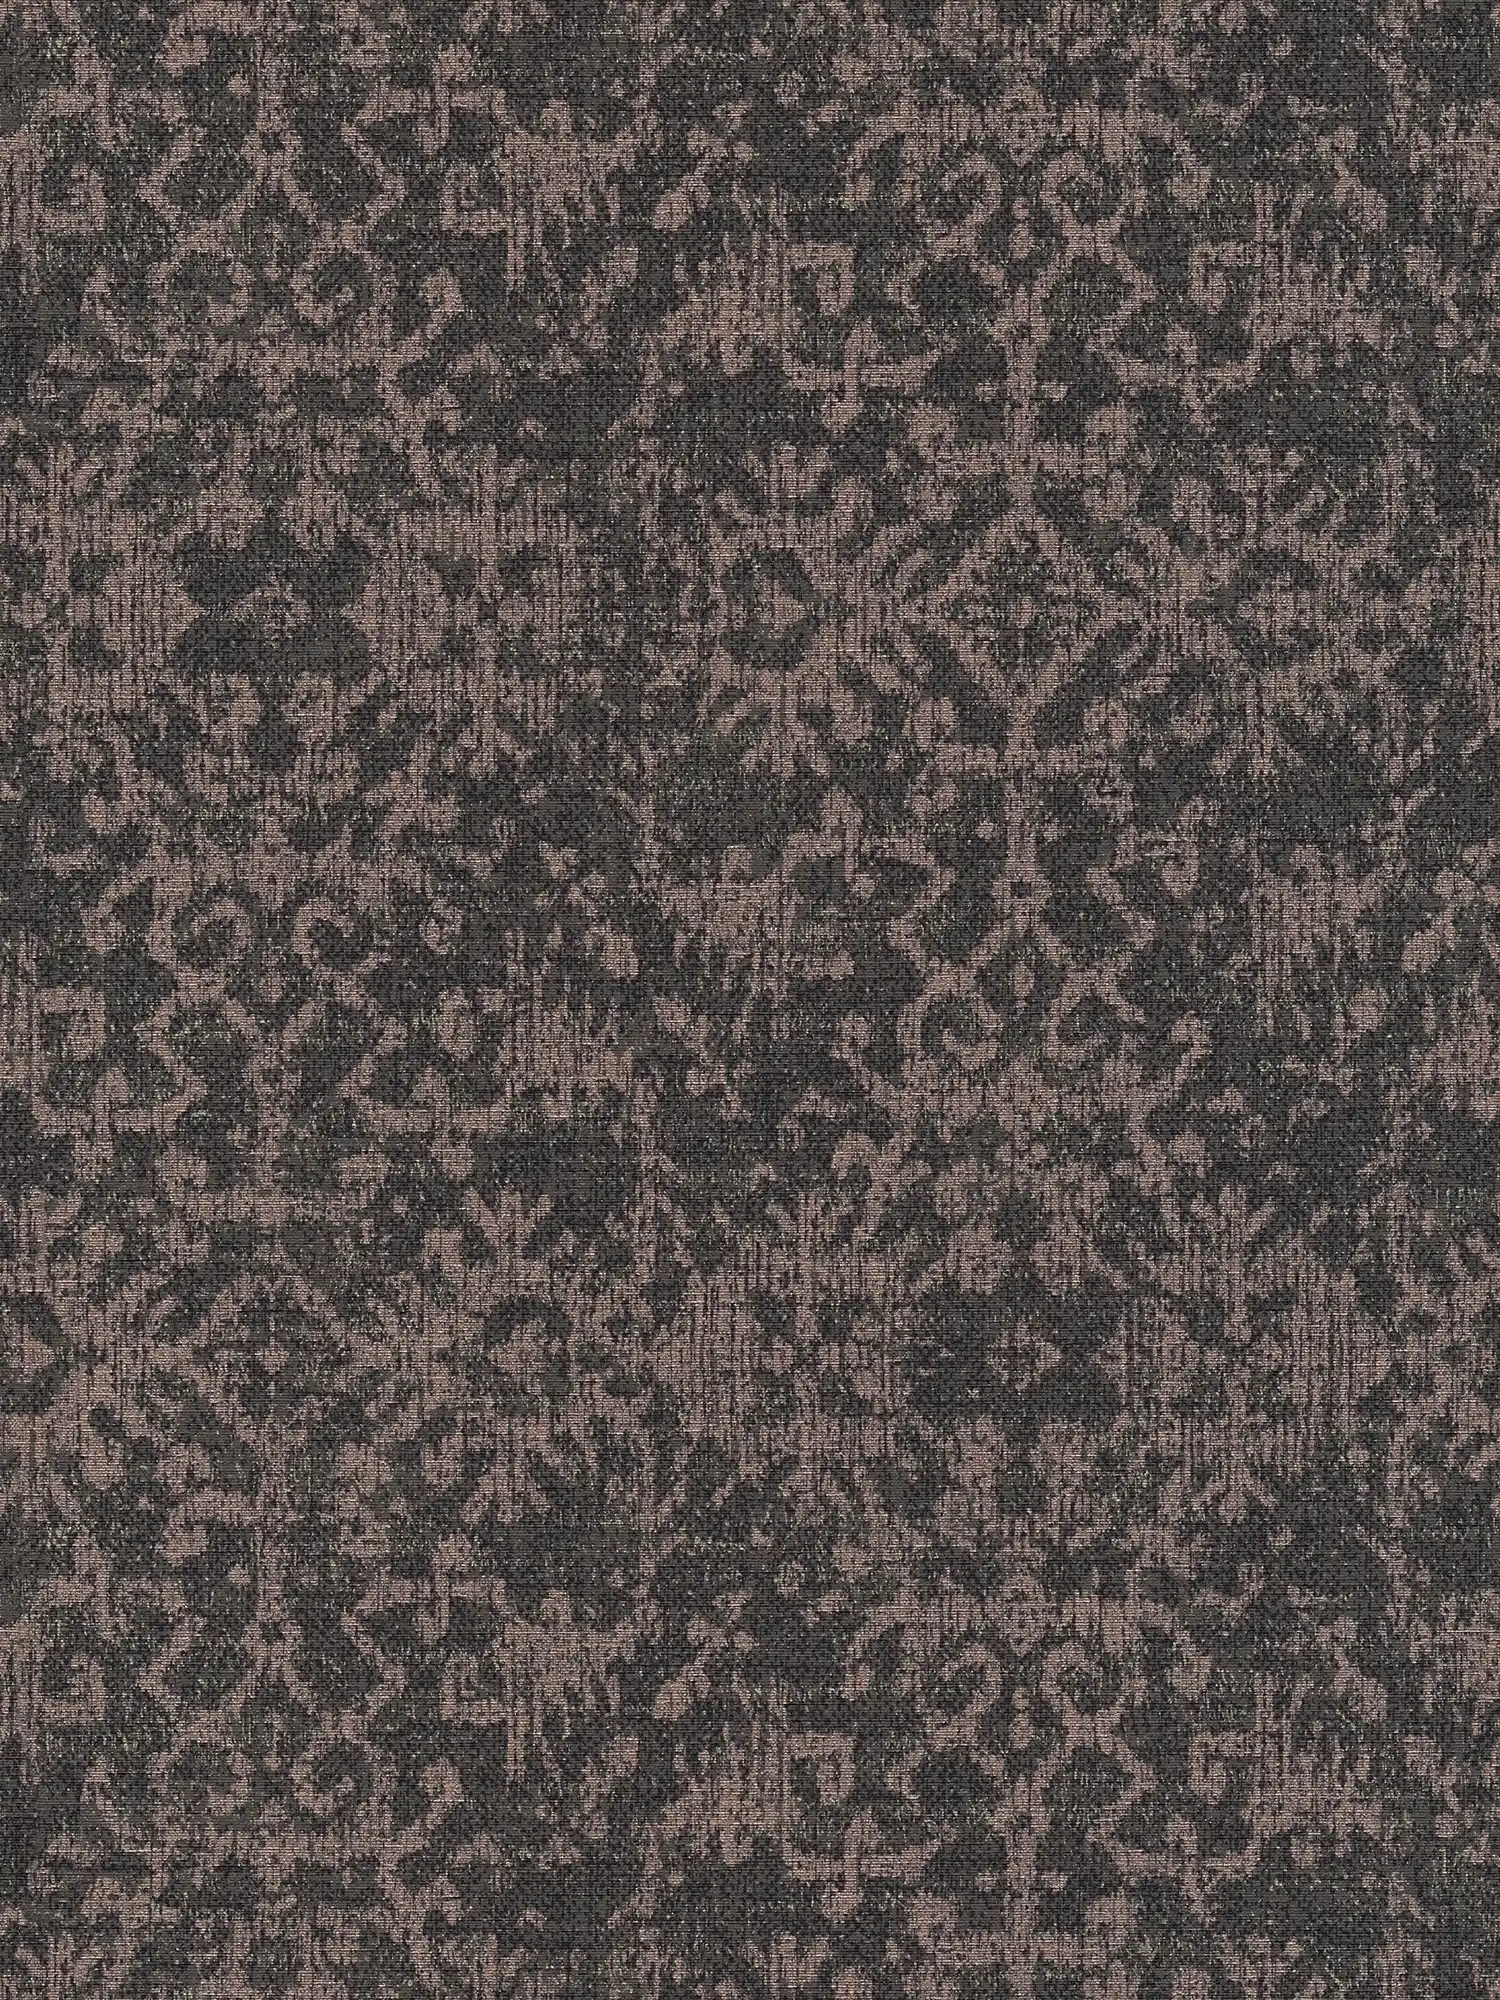 Black wallpaper with textile look and carpet design
